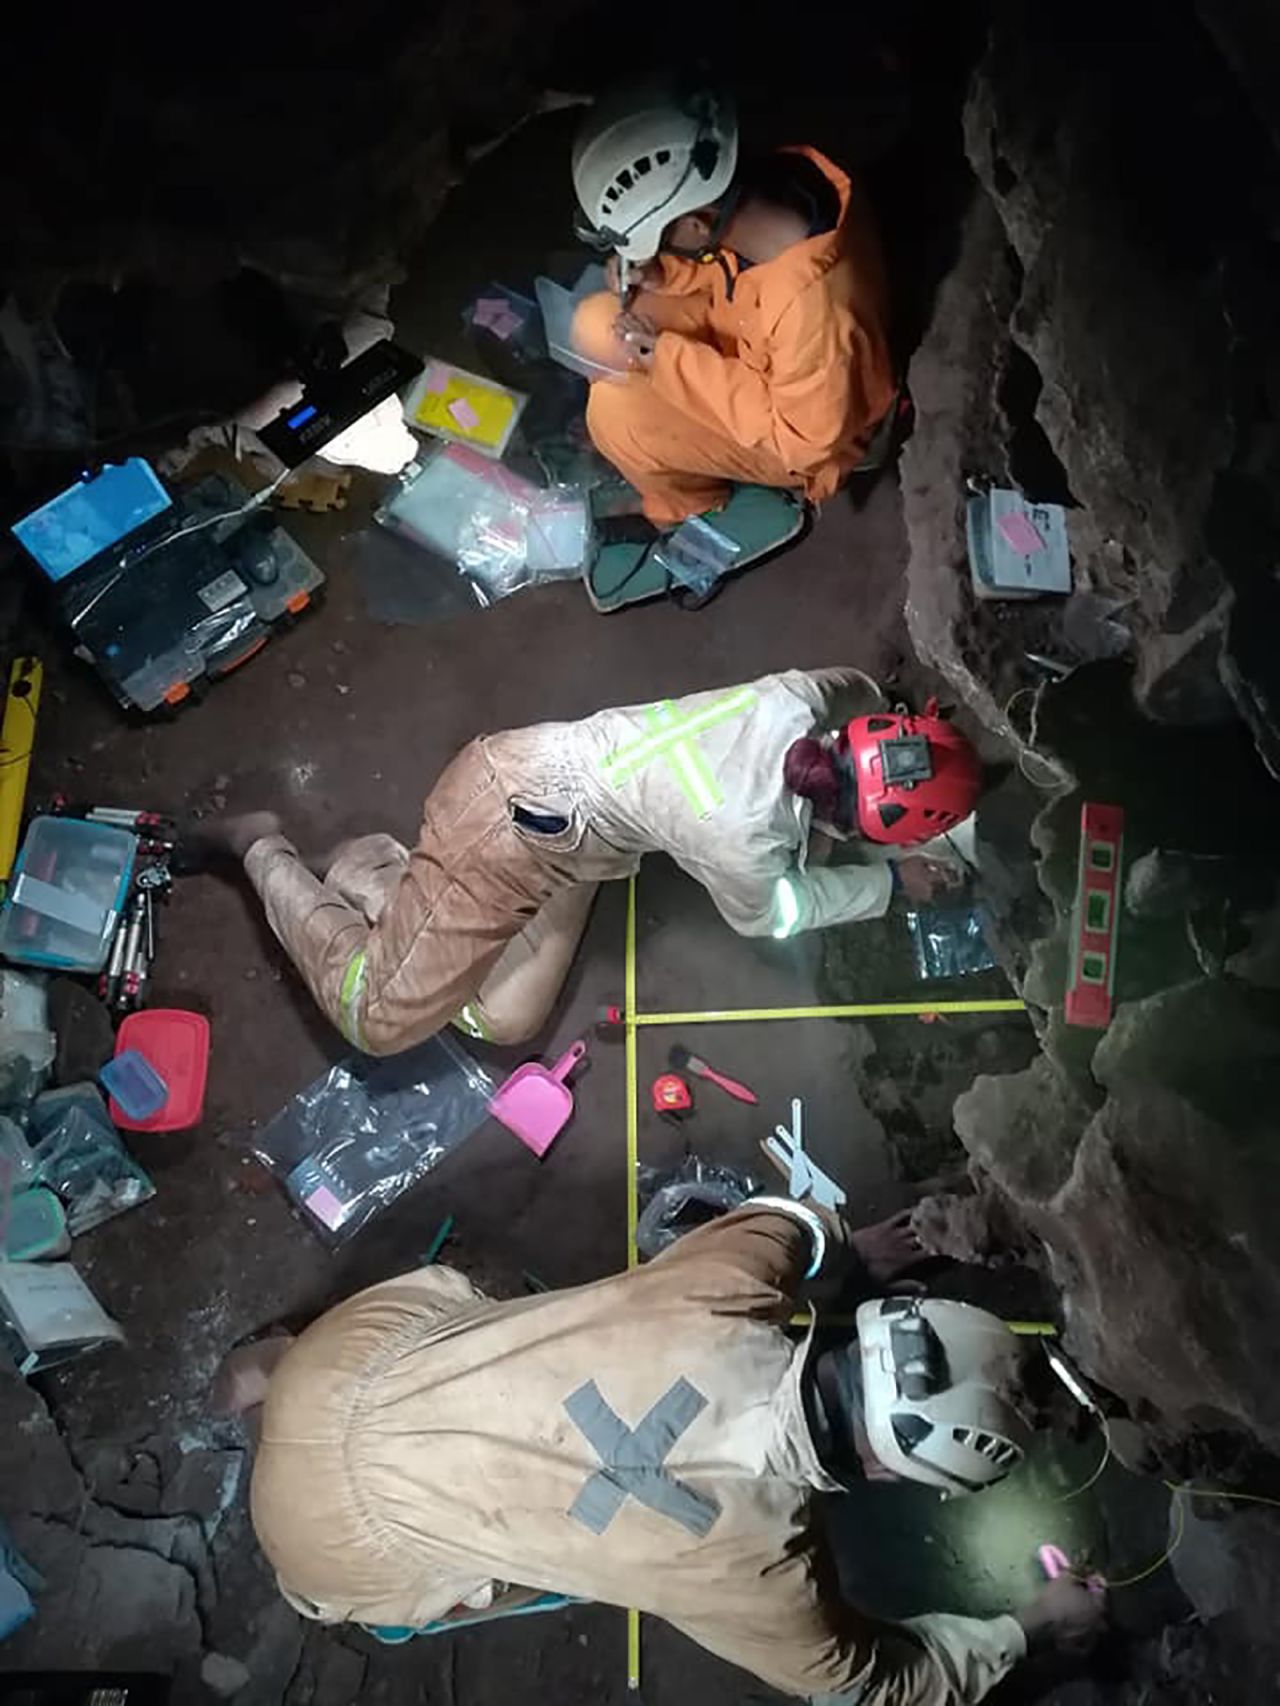 In 2019, she returned to Rising Star with a team to further excavate the second site where additional bones belonging to Homo naledi were found, including the most <a href="https://www.maropeng.co.za/content/page/the-lesedi-chamber" target="_blank" target="_blank">complete skeleton</a> to date. Here, the team works in the Lesedi Chamber.